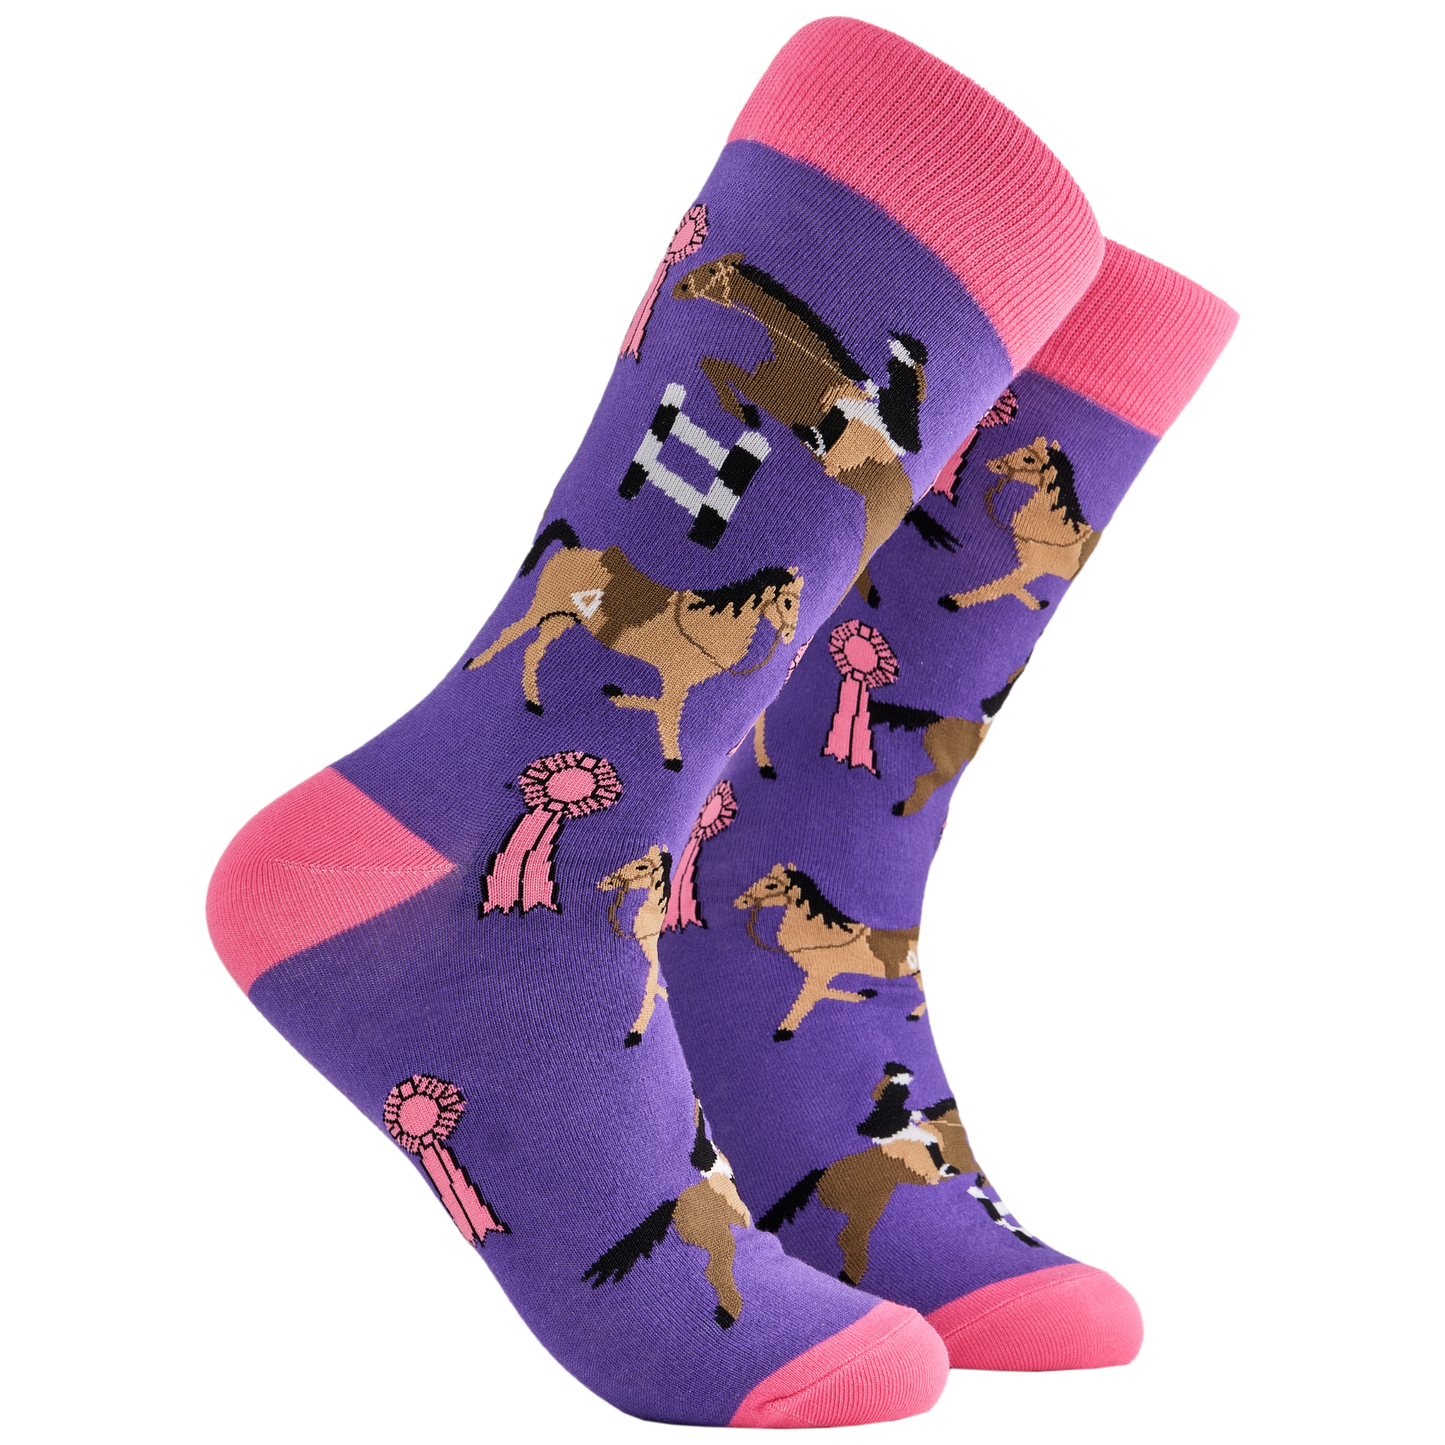 Pony Socks - Pony Club. A pair of socks depicting tea cups and show jumping horses. Purple legs, pink cuff, heel and toe.